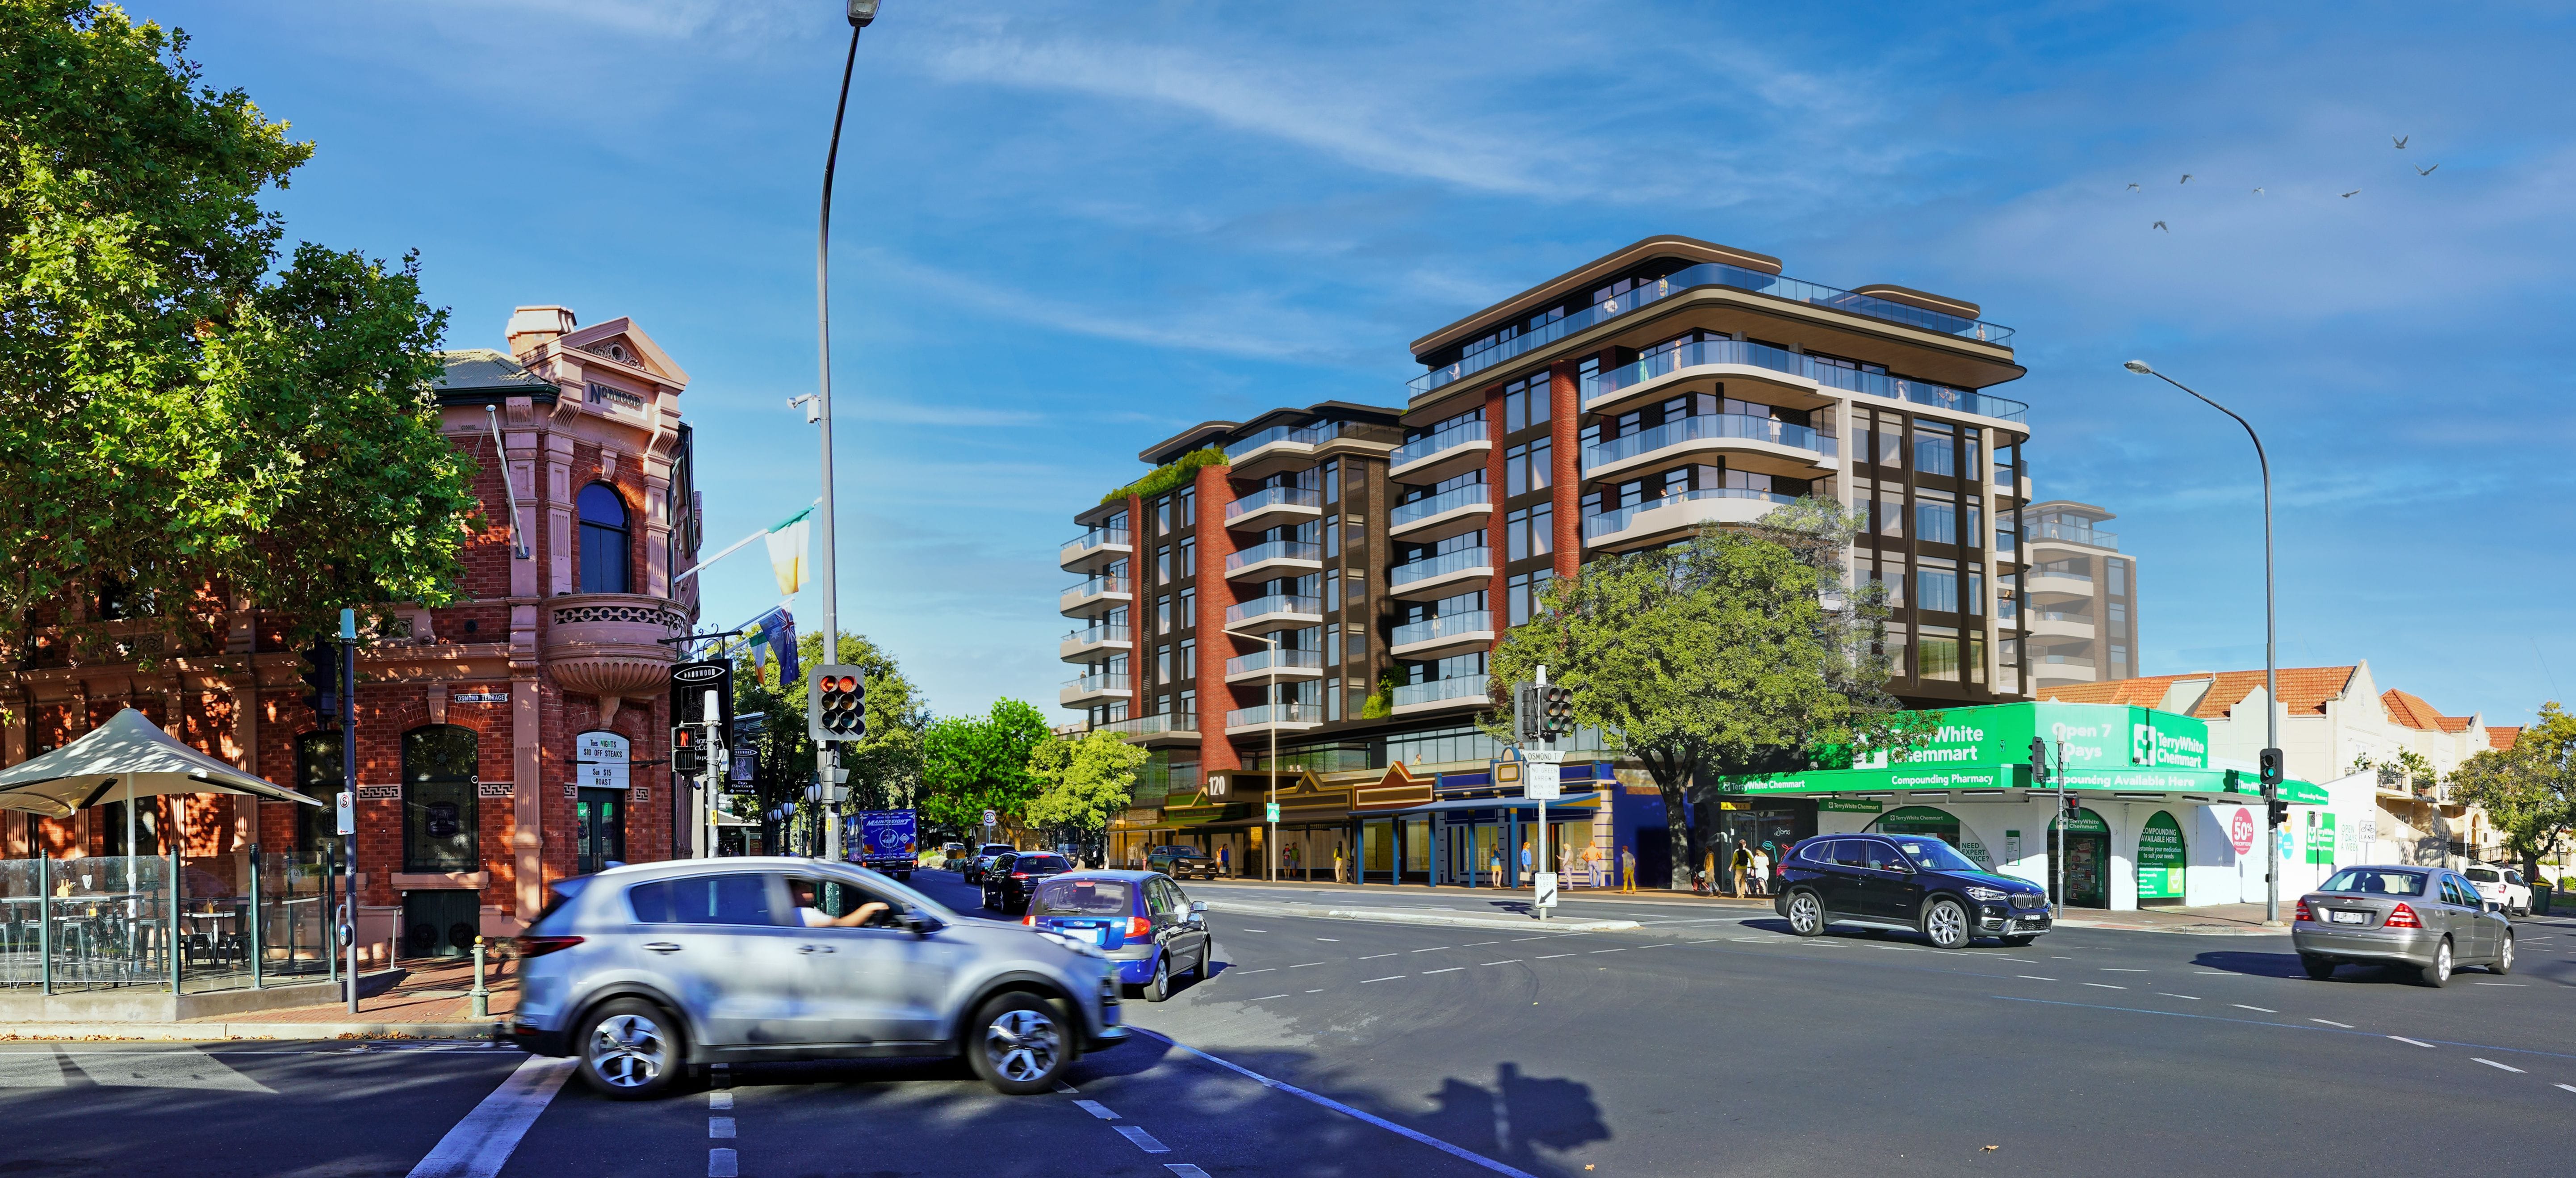 Adelaide’s controversial $95m ORTA development gets green light to proceed